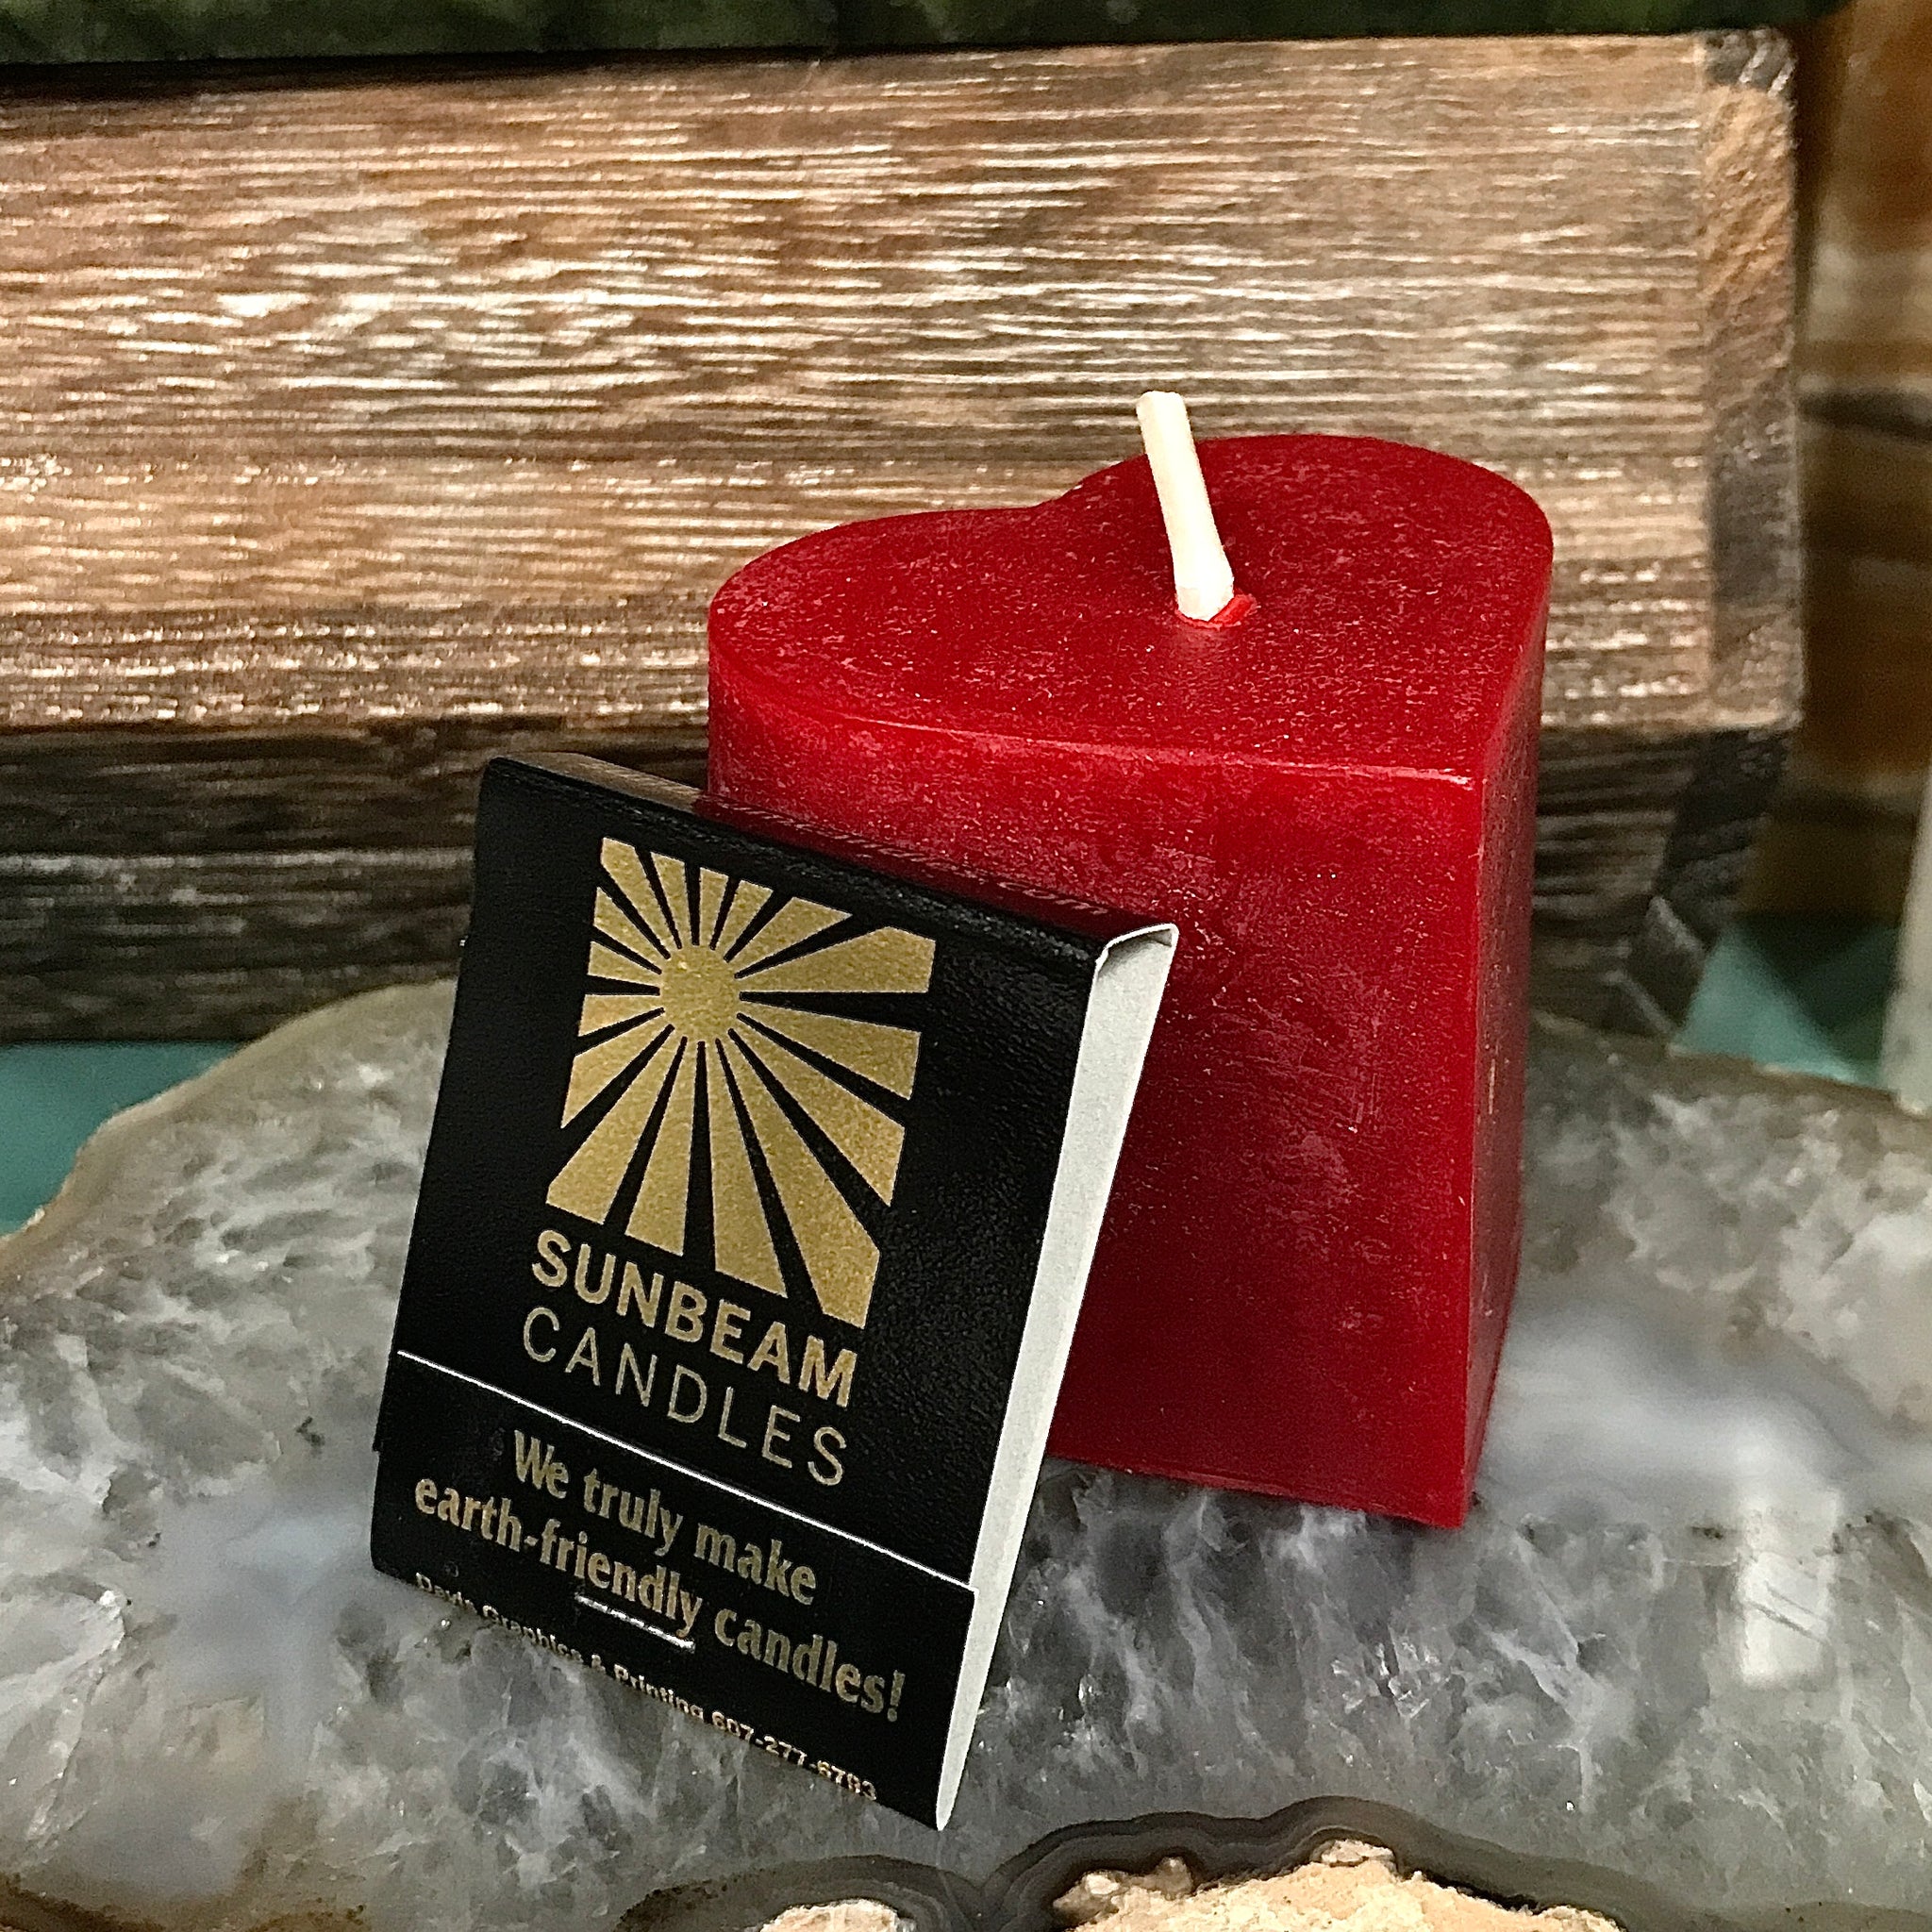 Beeswax Red Heart Candle 2 x 2 Inch